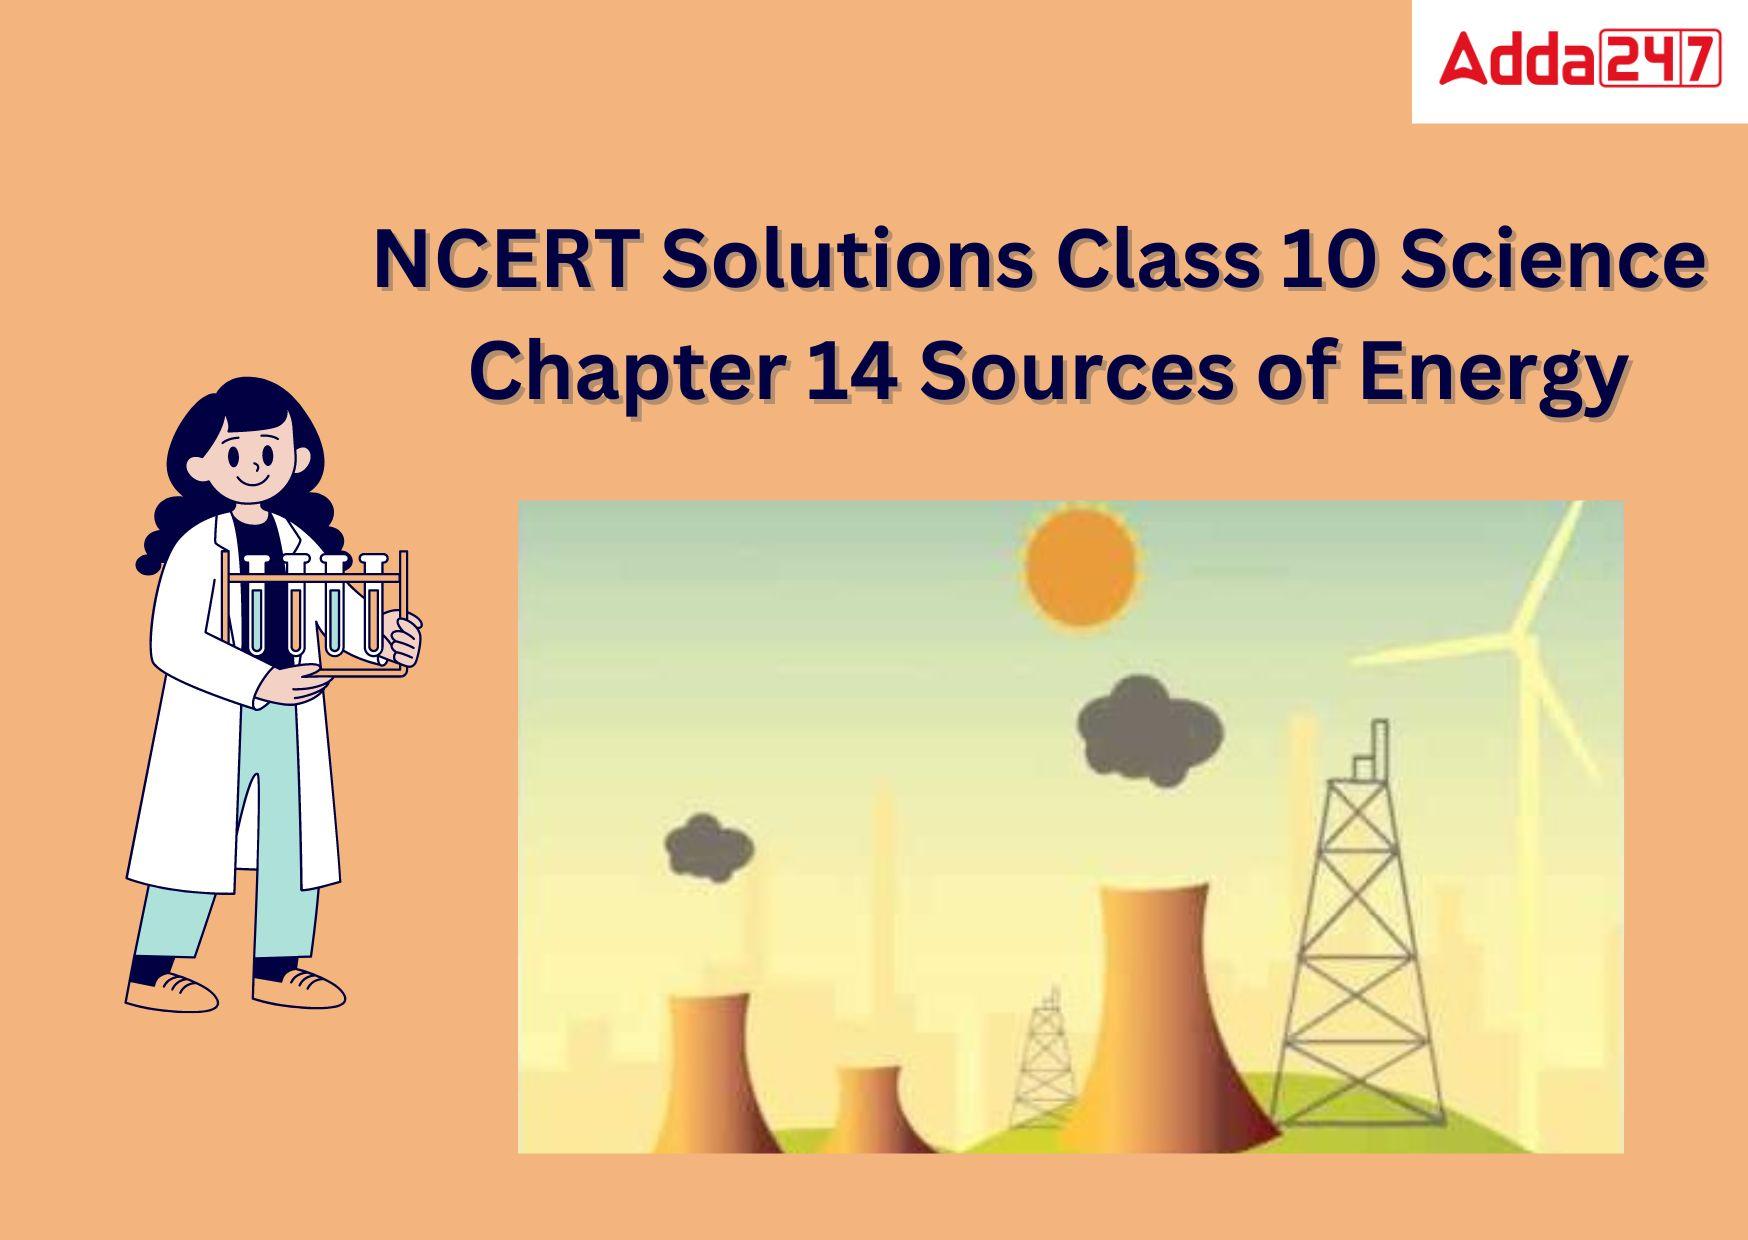 NCERT Solutions for Class 10 Science Chapter 14- Sources of Energy, PDF_30.1